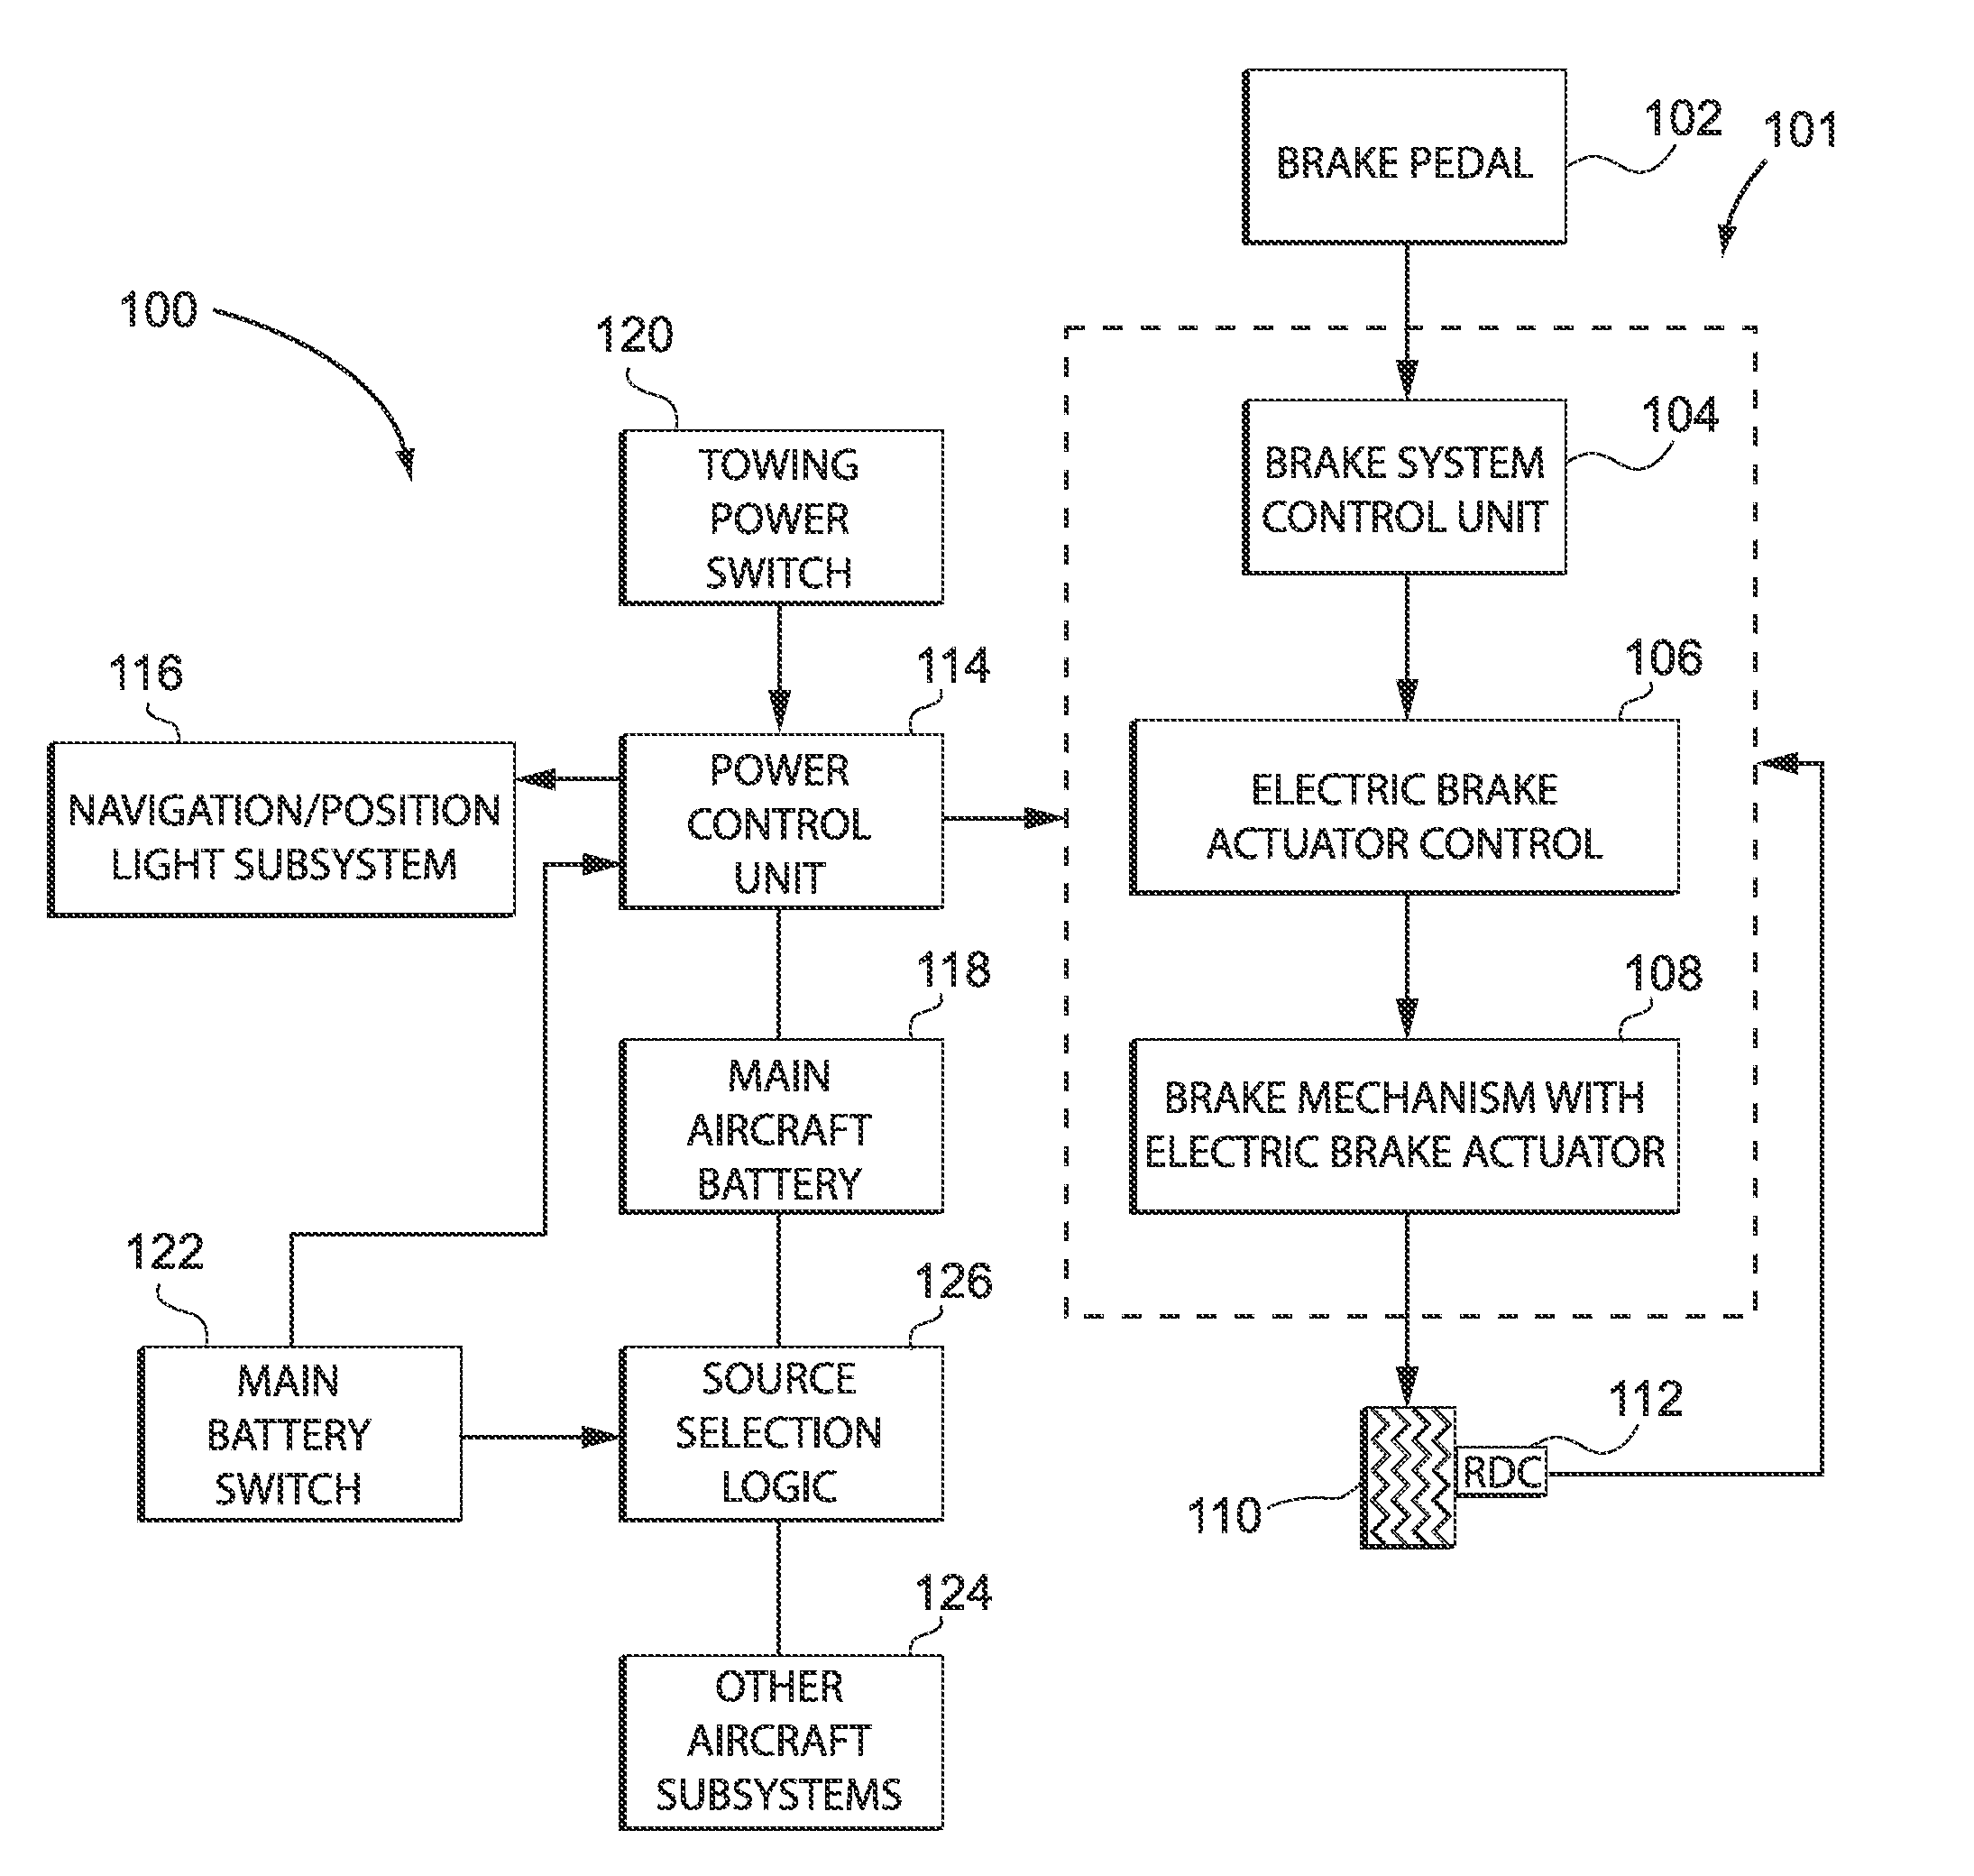 Ground towing power architecture for an electric brake system of an aircraft